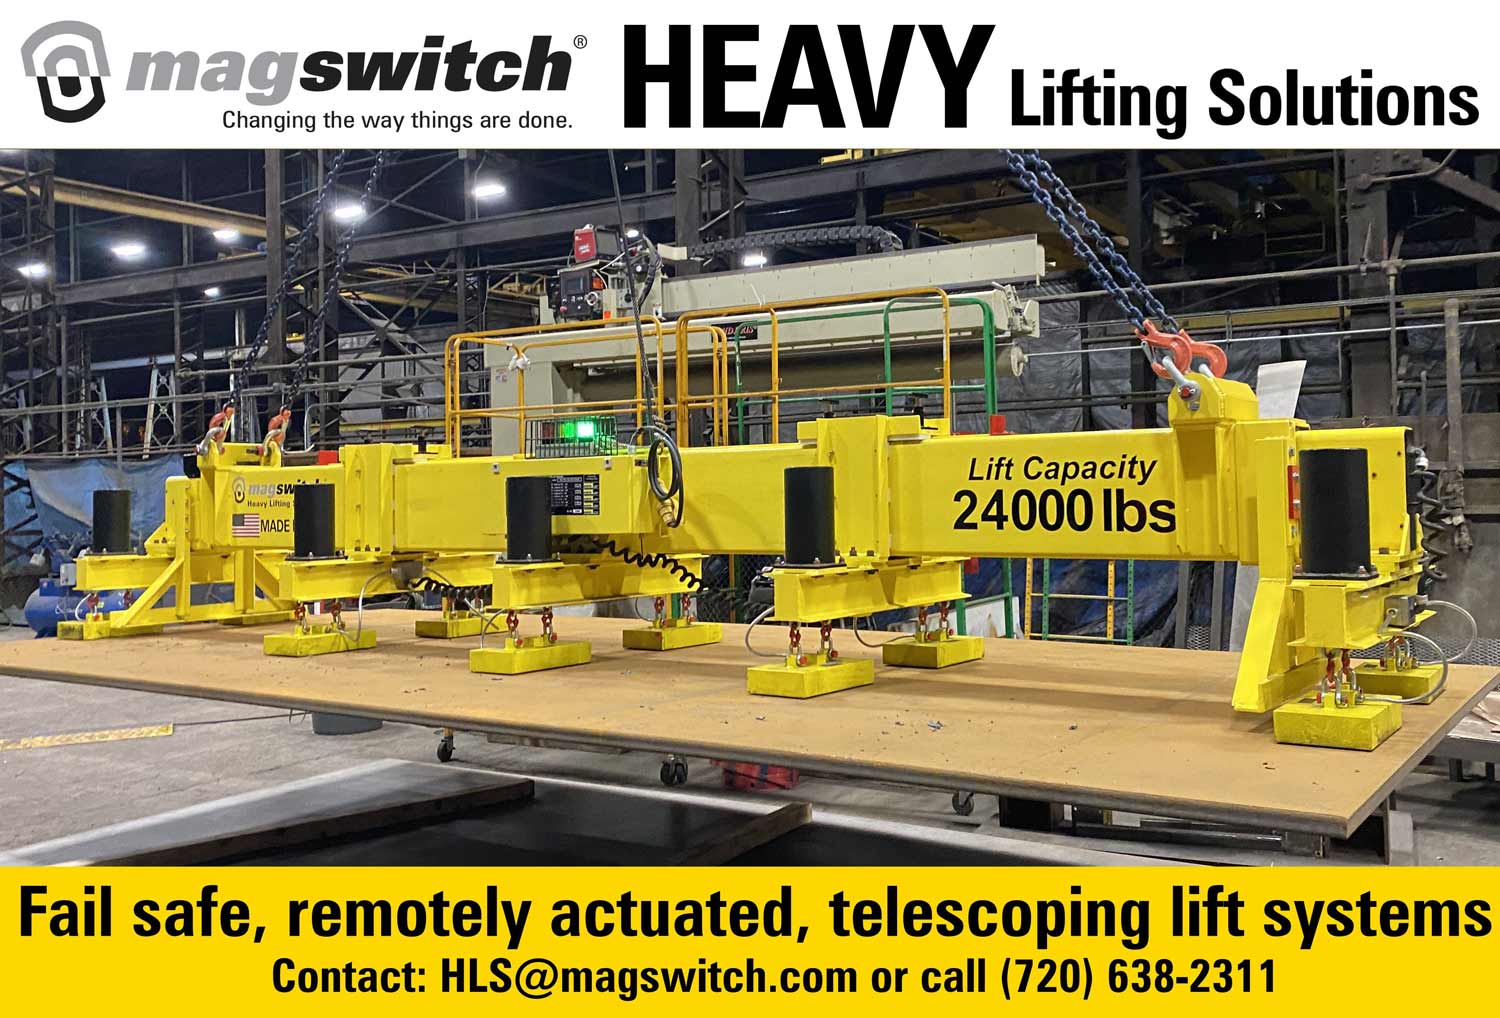 Magswitch Heavy Lifting Solutions Advertisement